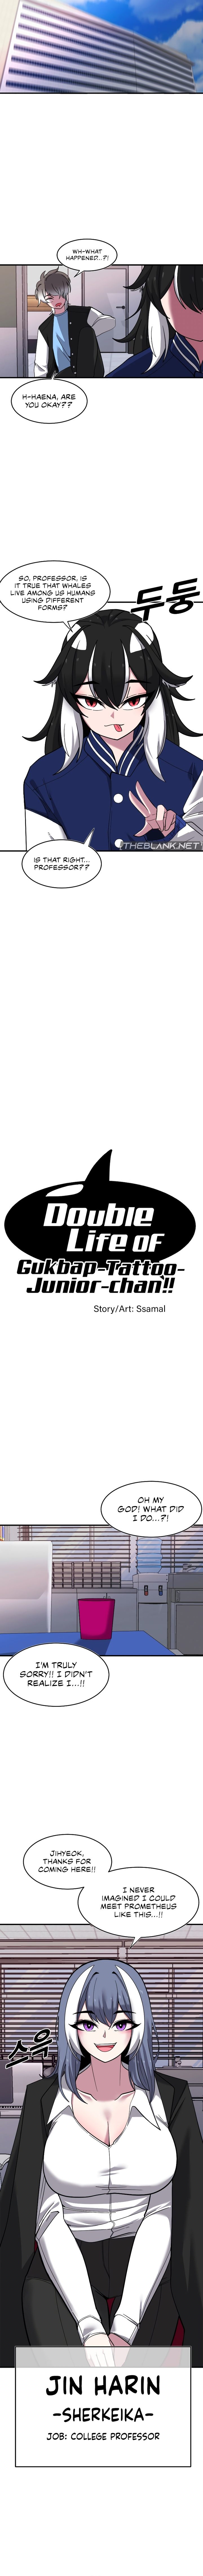 Double Life of Gukbap - Chapter 18 Page 5